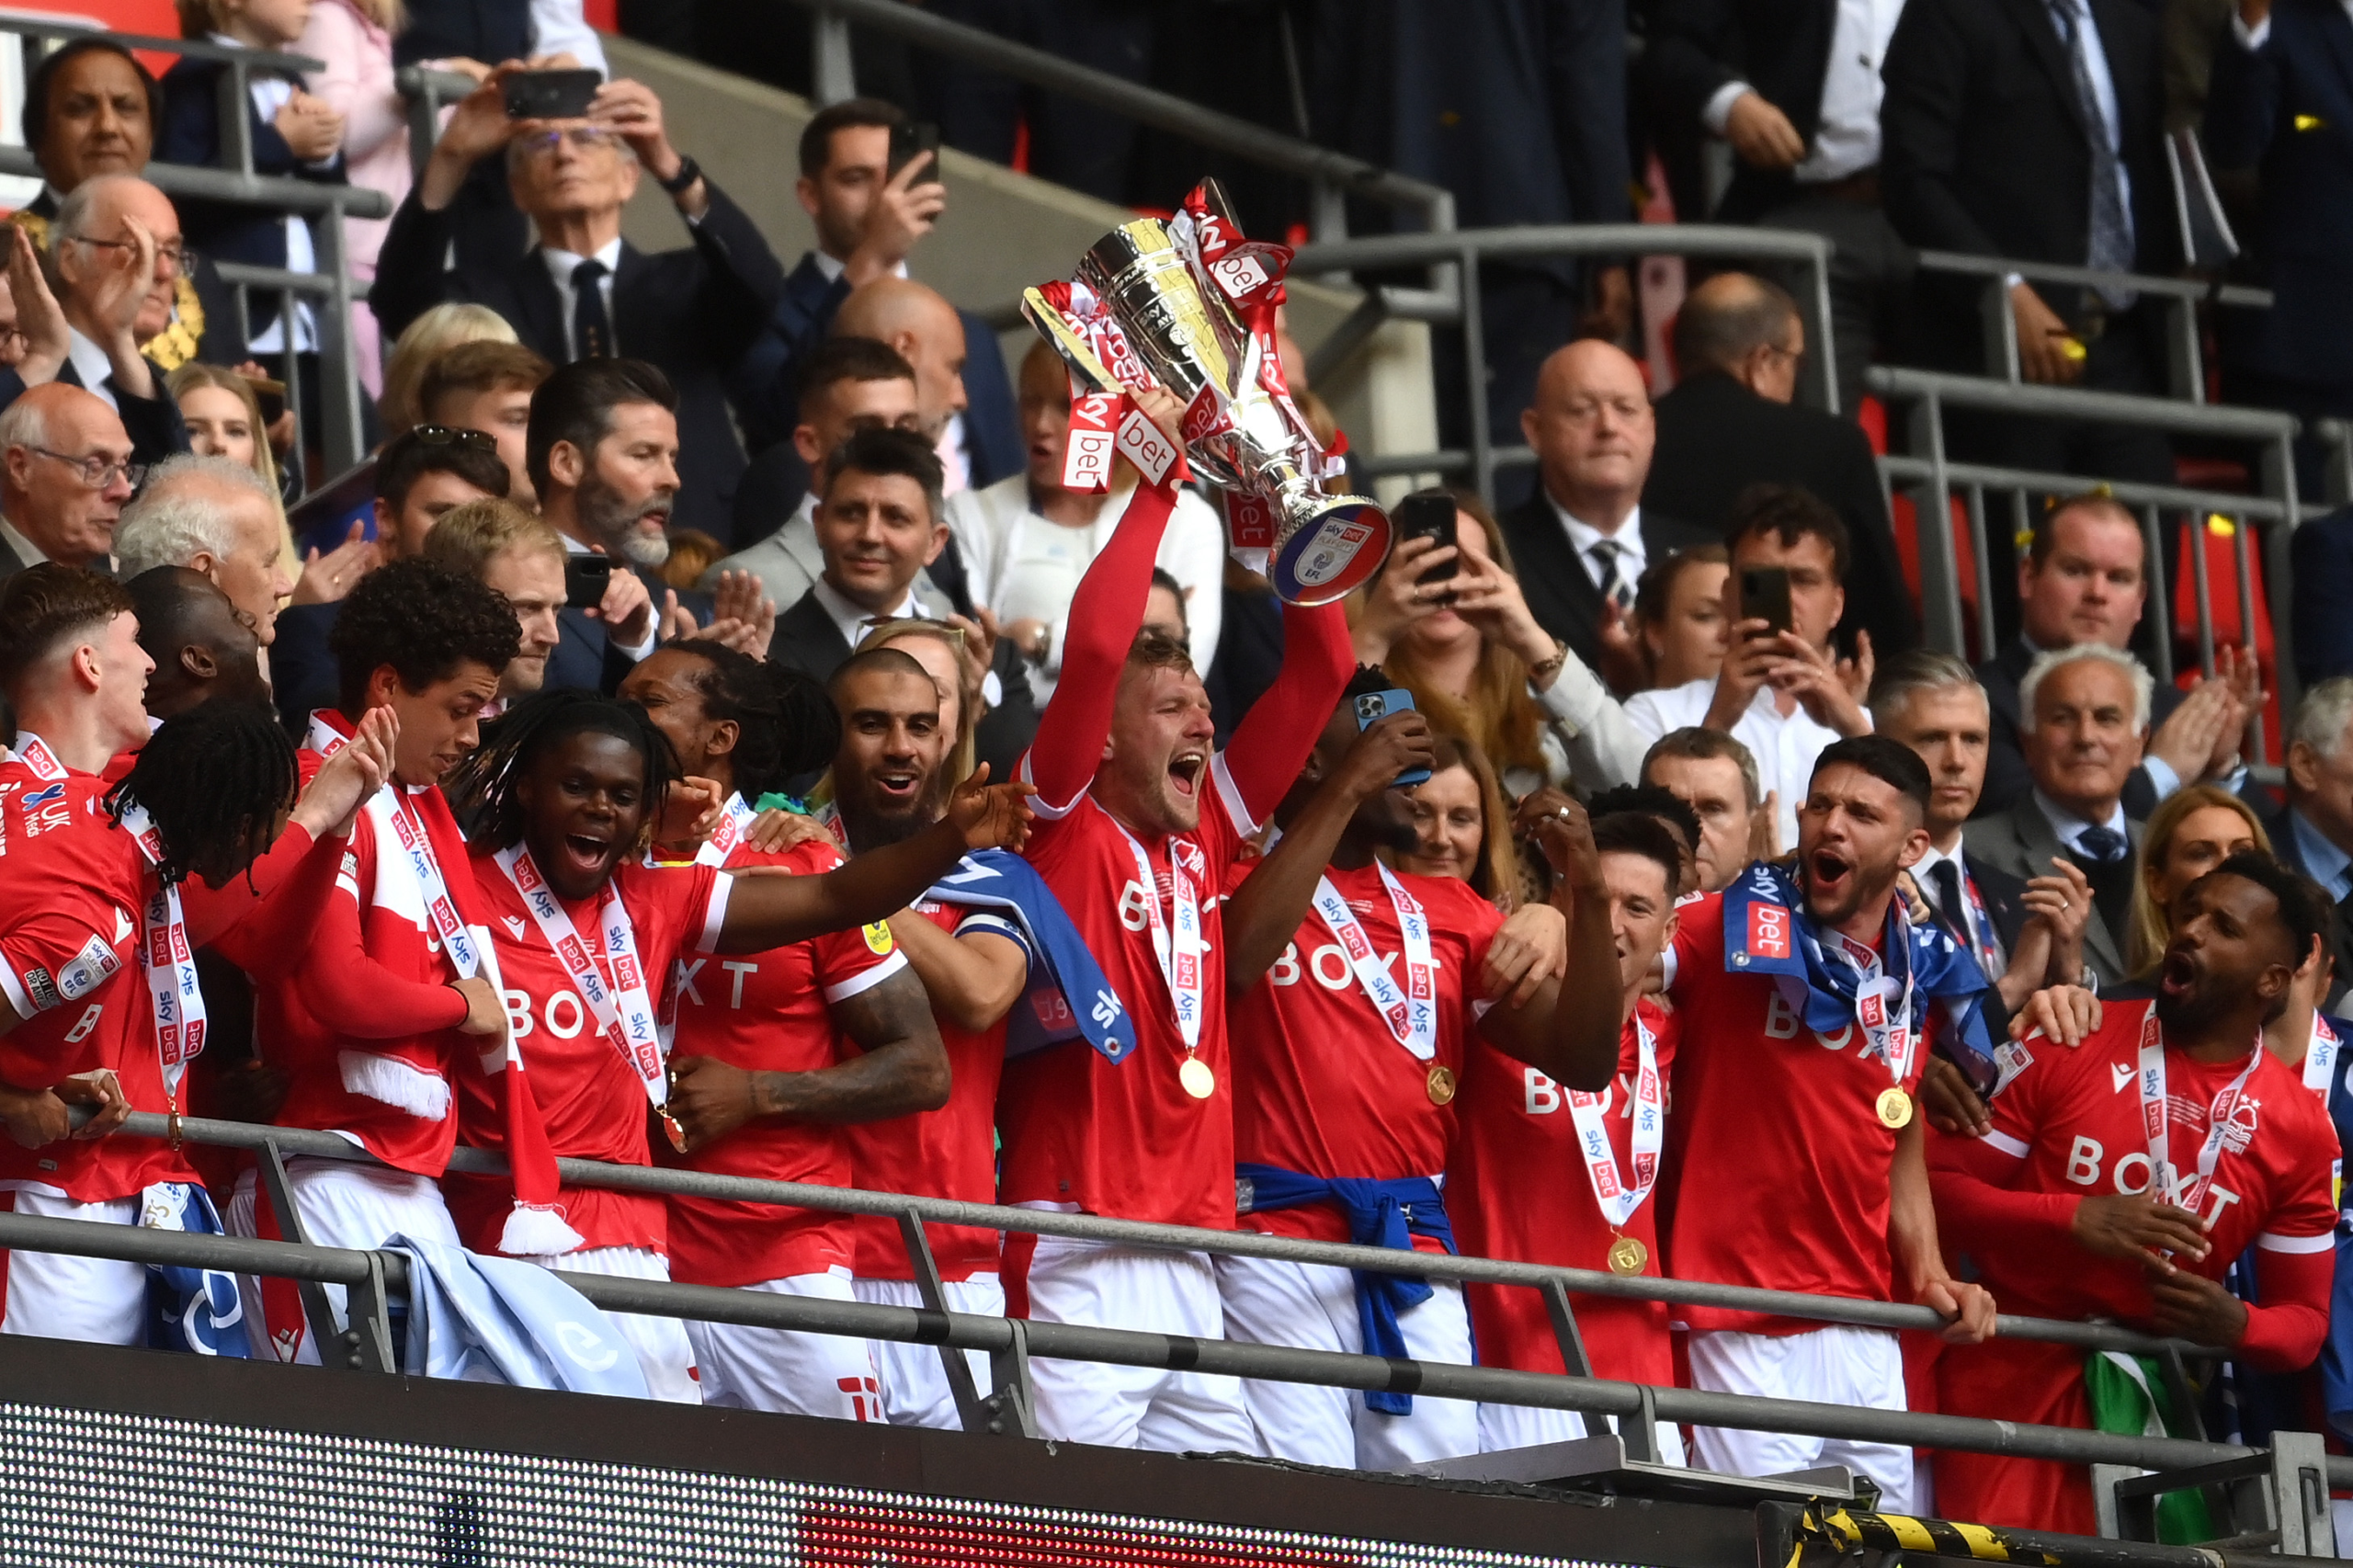 EFL play-offs 2022/23: Fixtures, dates, kick-off times and how to follow – season set for stunning climax with promotion across England up for grabs